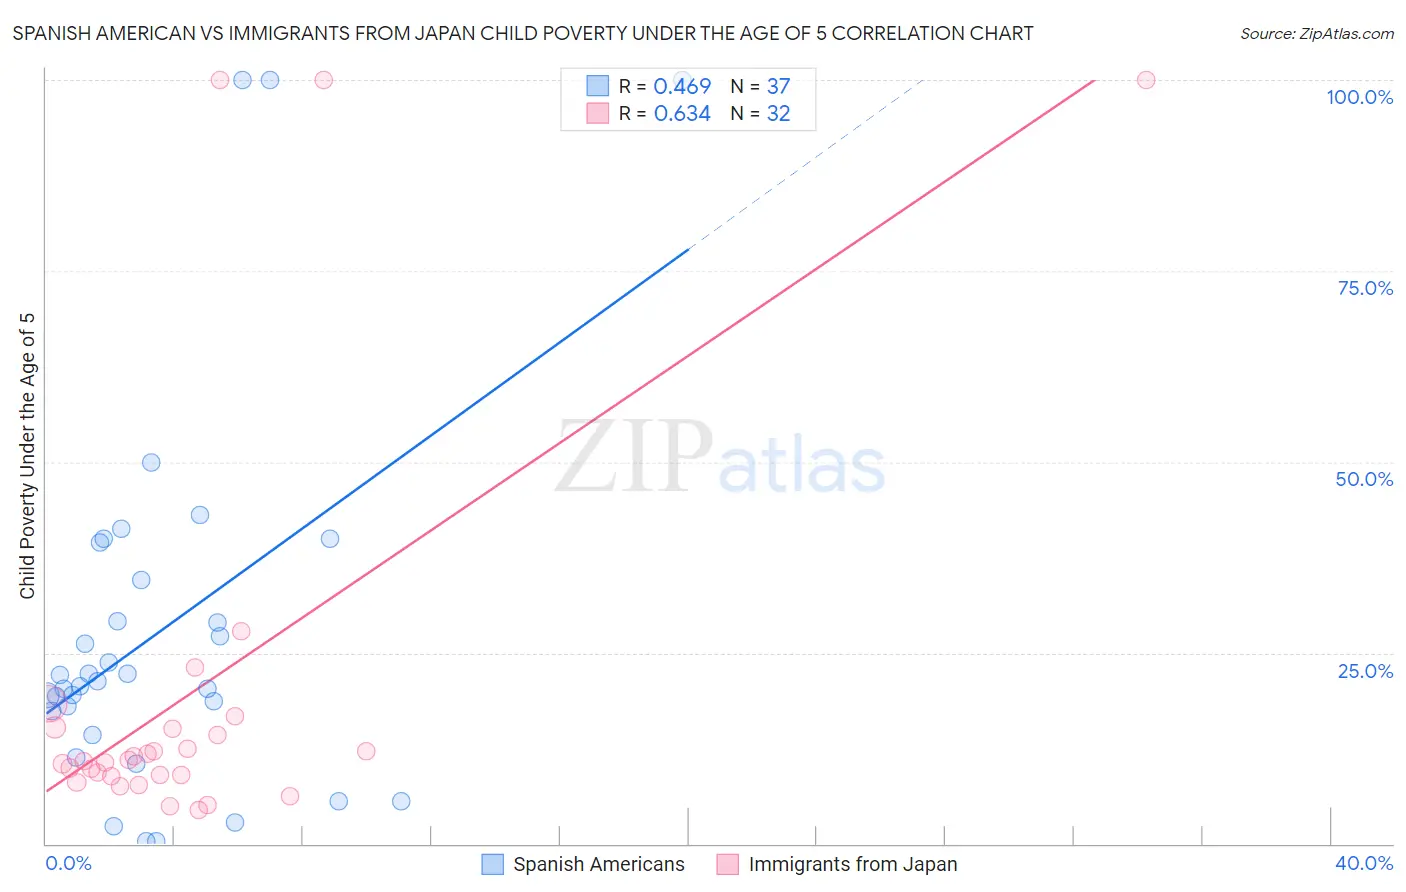 Spanish American vs Immigrants from Japan Child Poverty Under the Age of 5